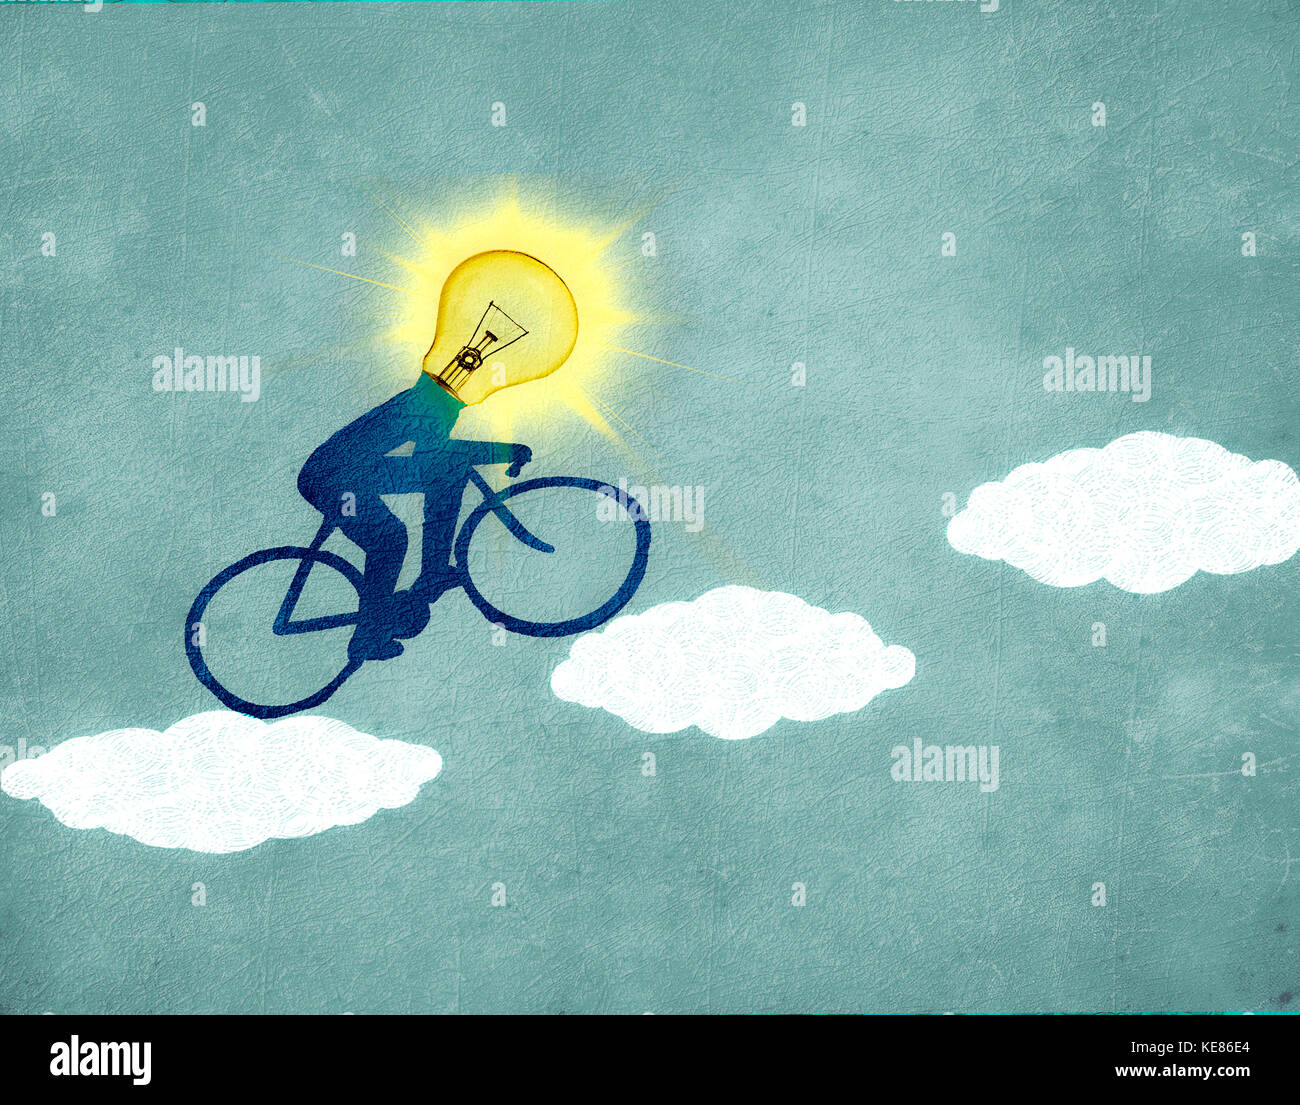 sun cyclist with clouds digital illustration Stock Photo